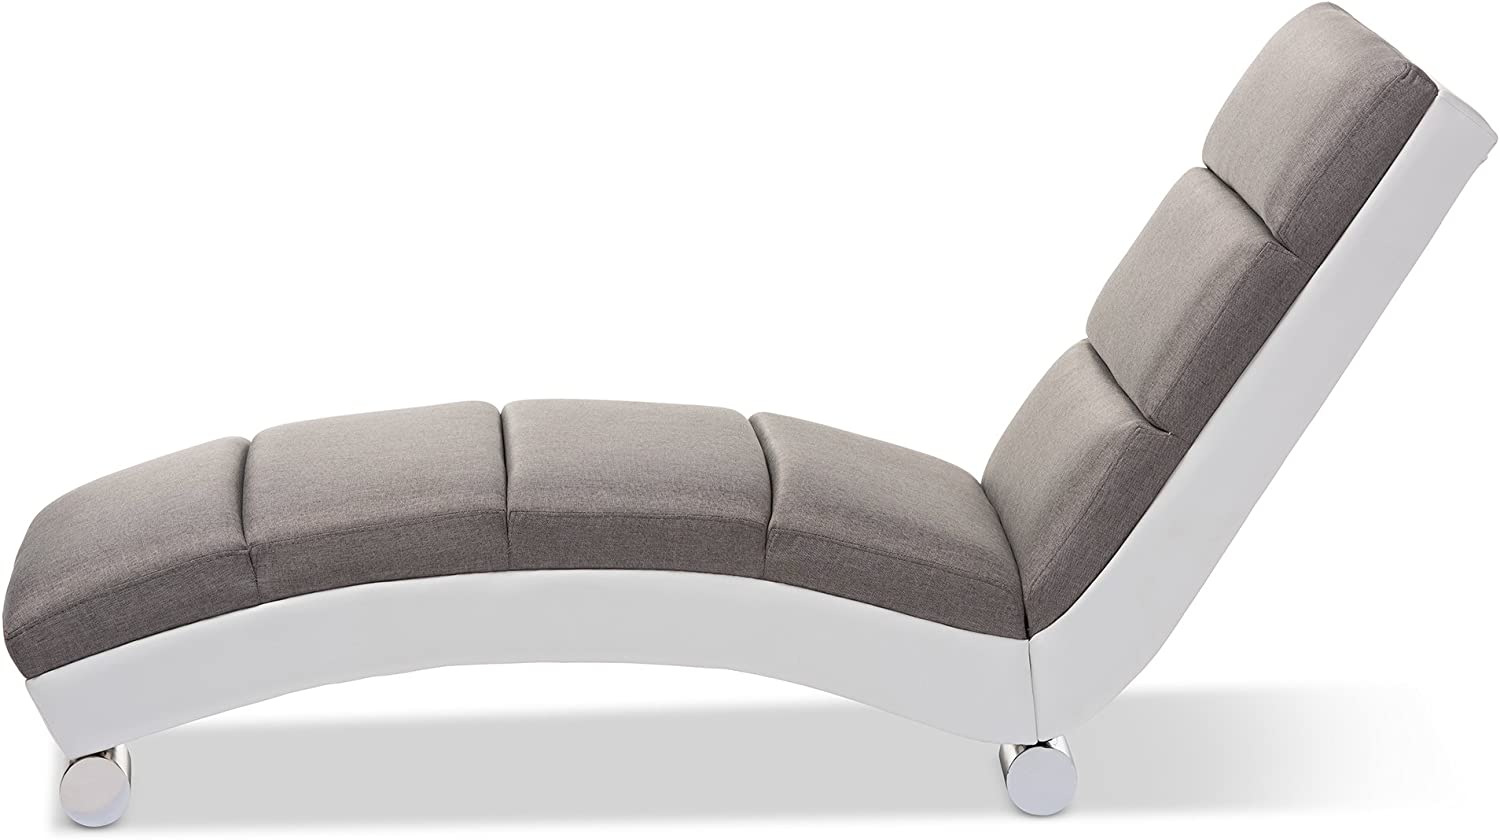 Baxton Studio Percy Modern Contemporary Grey Fabric and White Faux Leather Upholstered Chaise Lounge, Medium, Gray